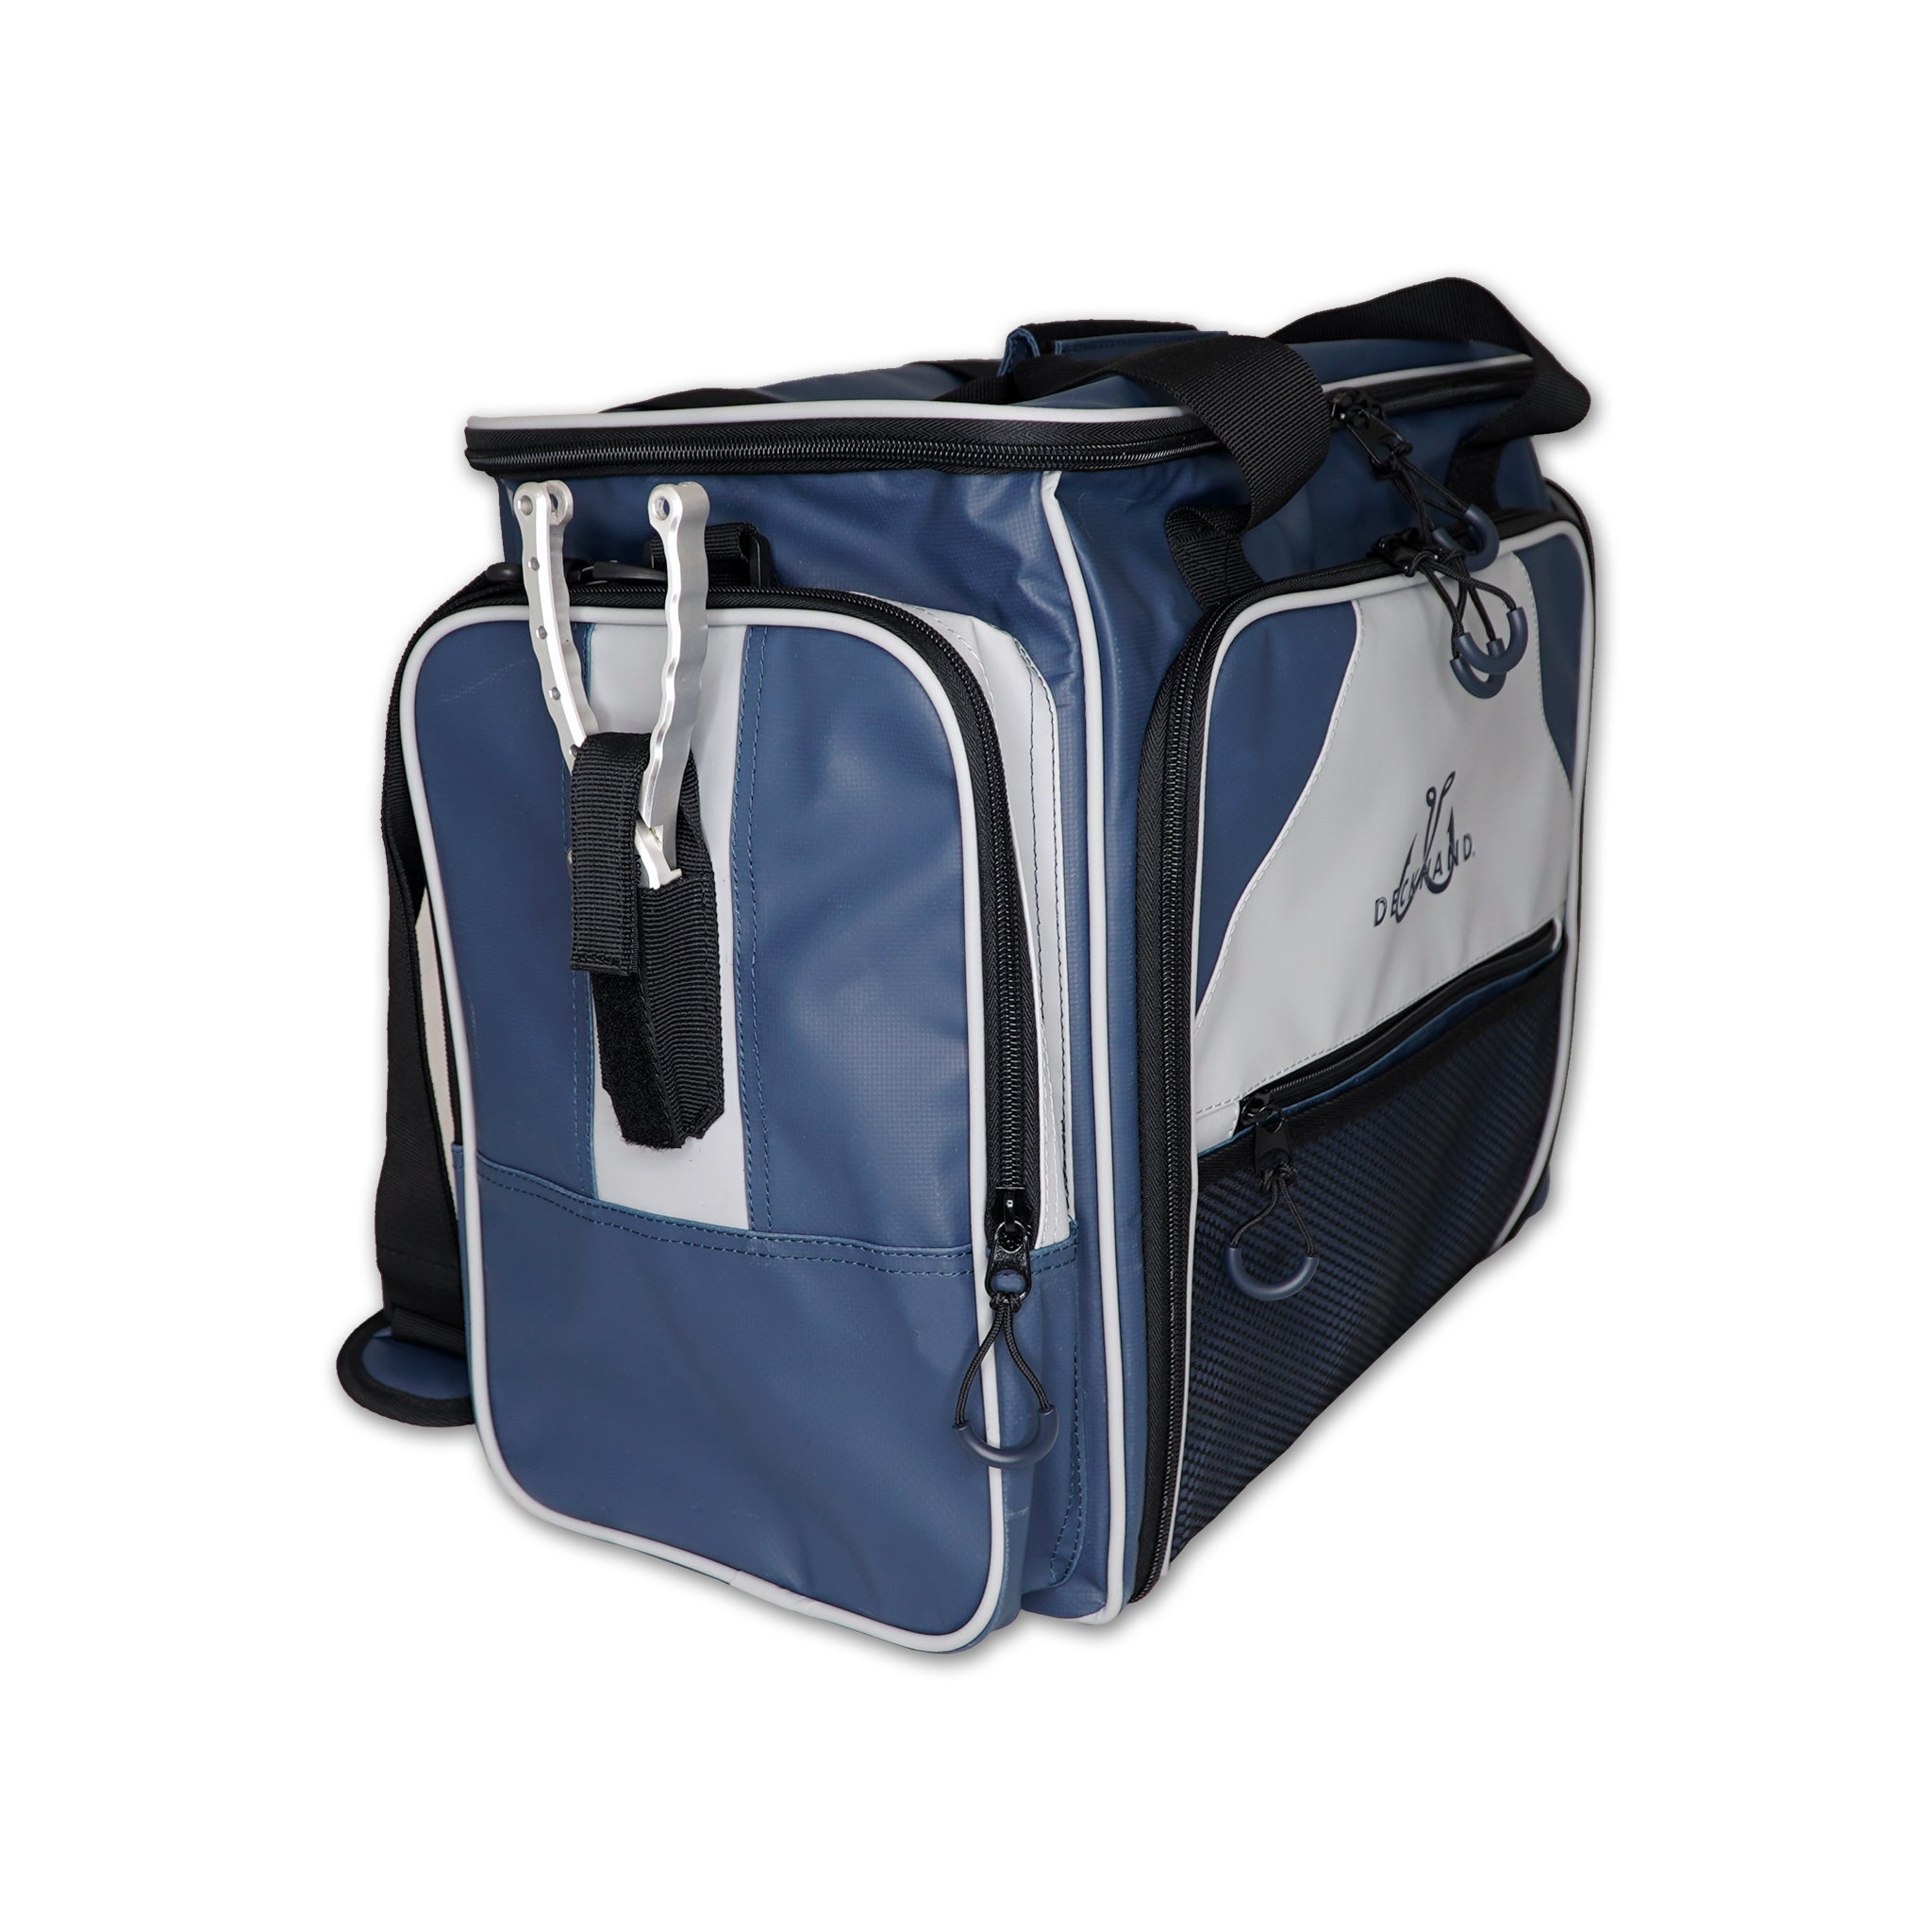 Tackle Bag Small - Deckhand Sports